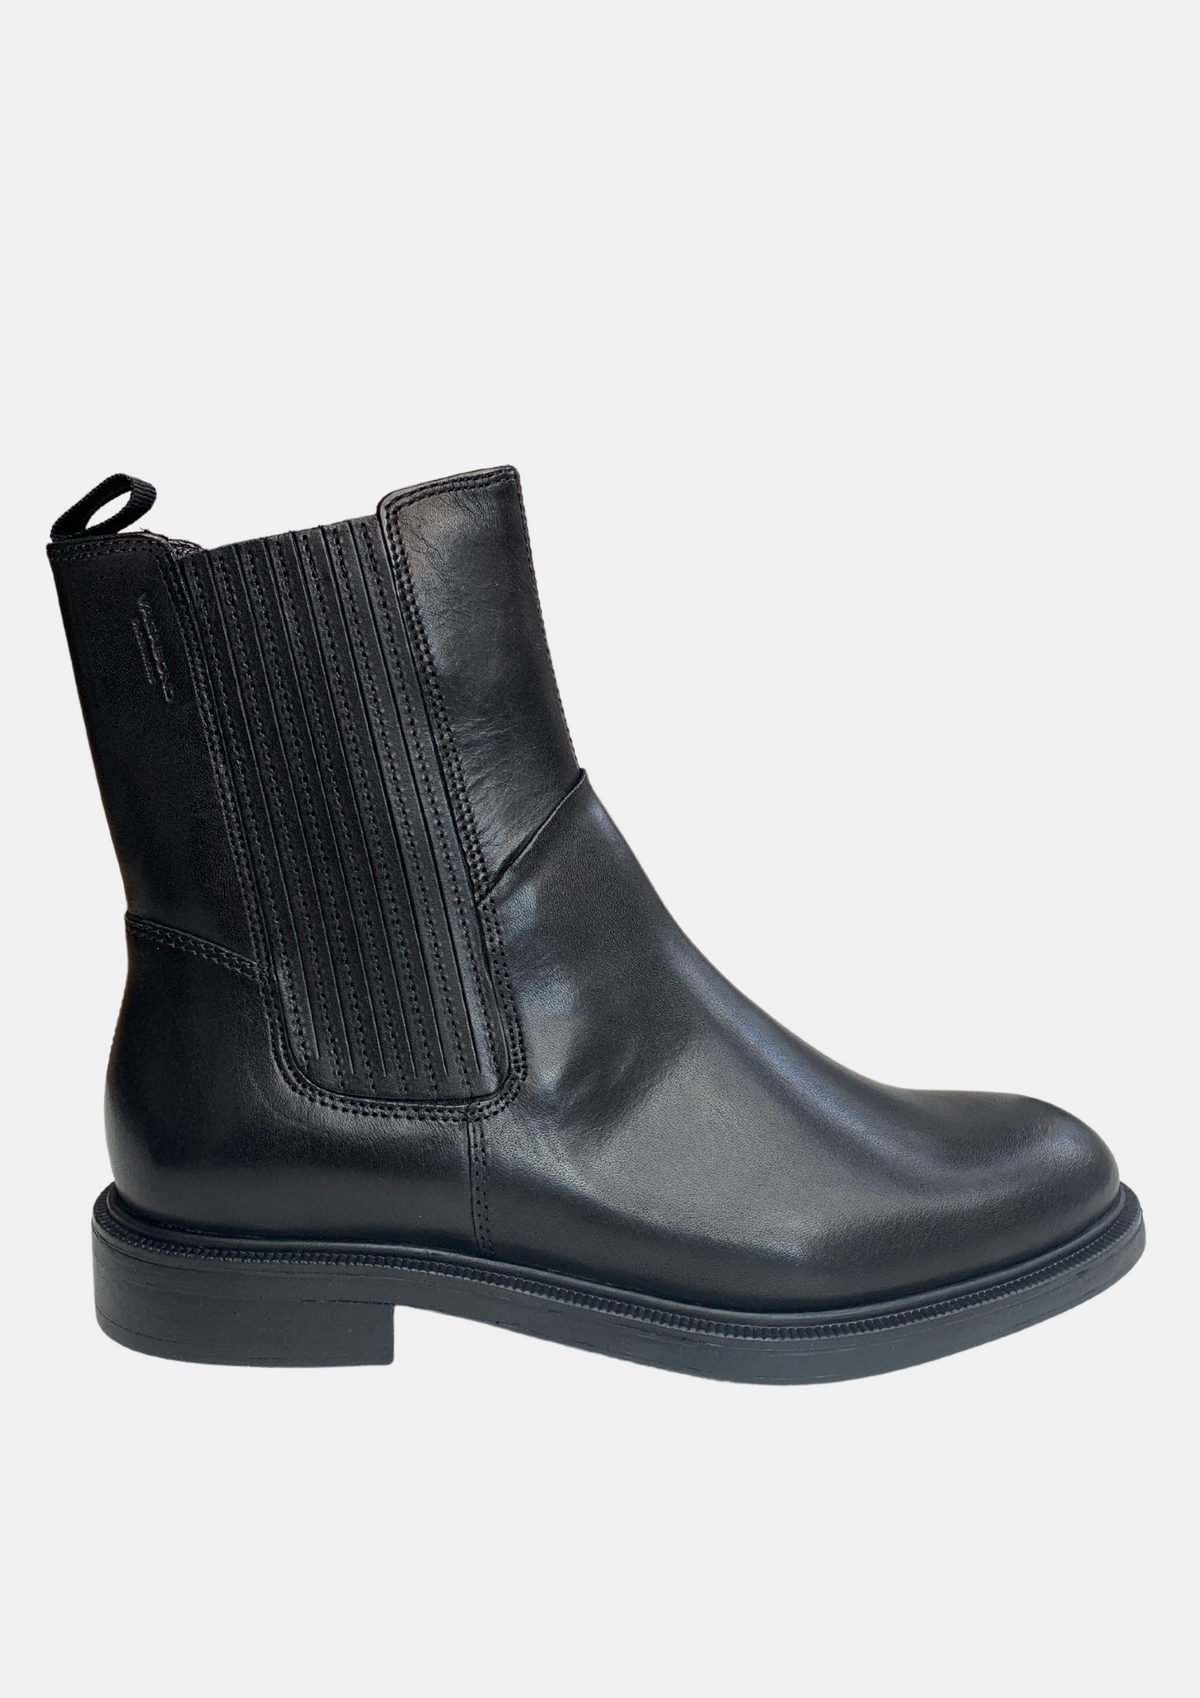 Black Chelsea boot with leather fillet details